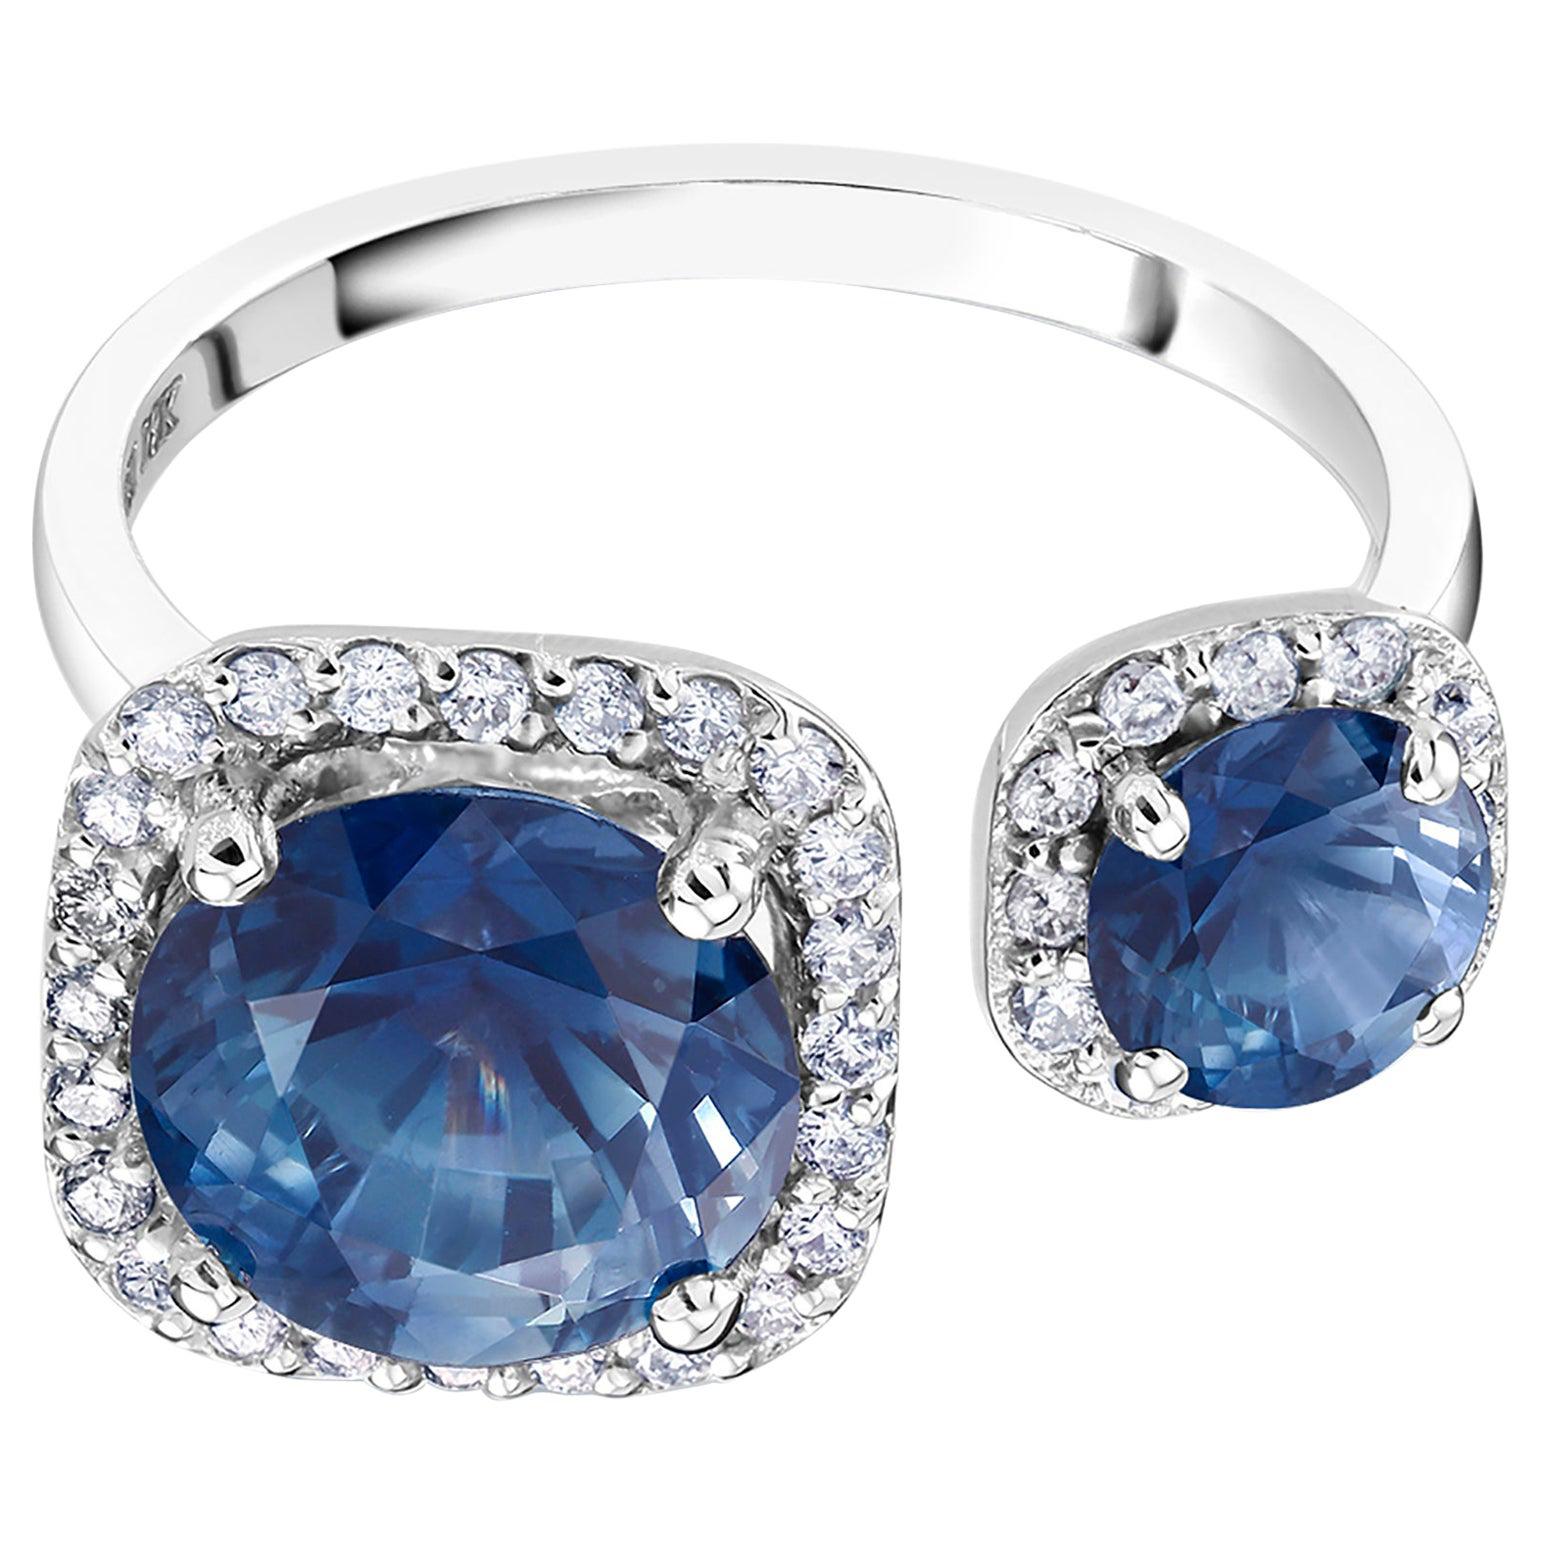 Sapphire and Diamond Open Shank Cocktail Ring Weighing 5.70 Carat